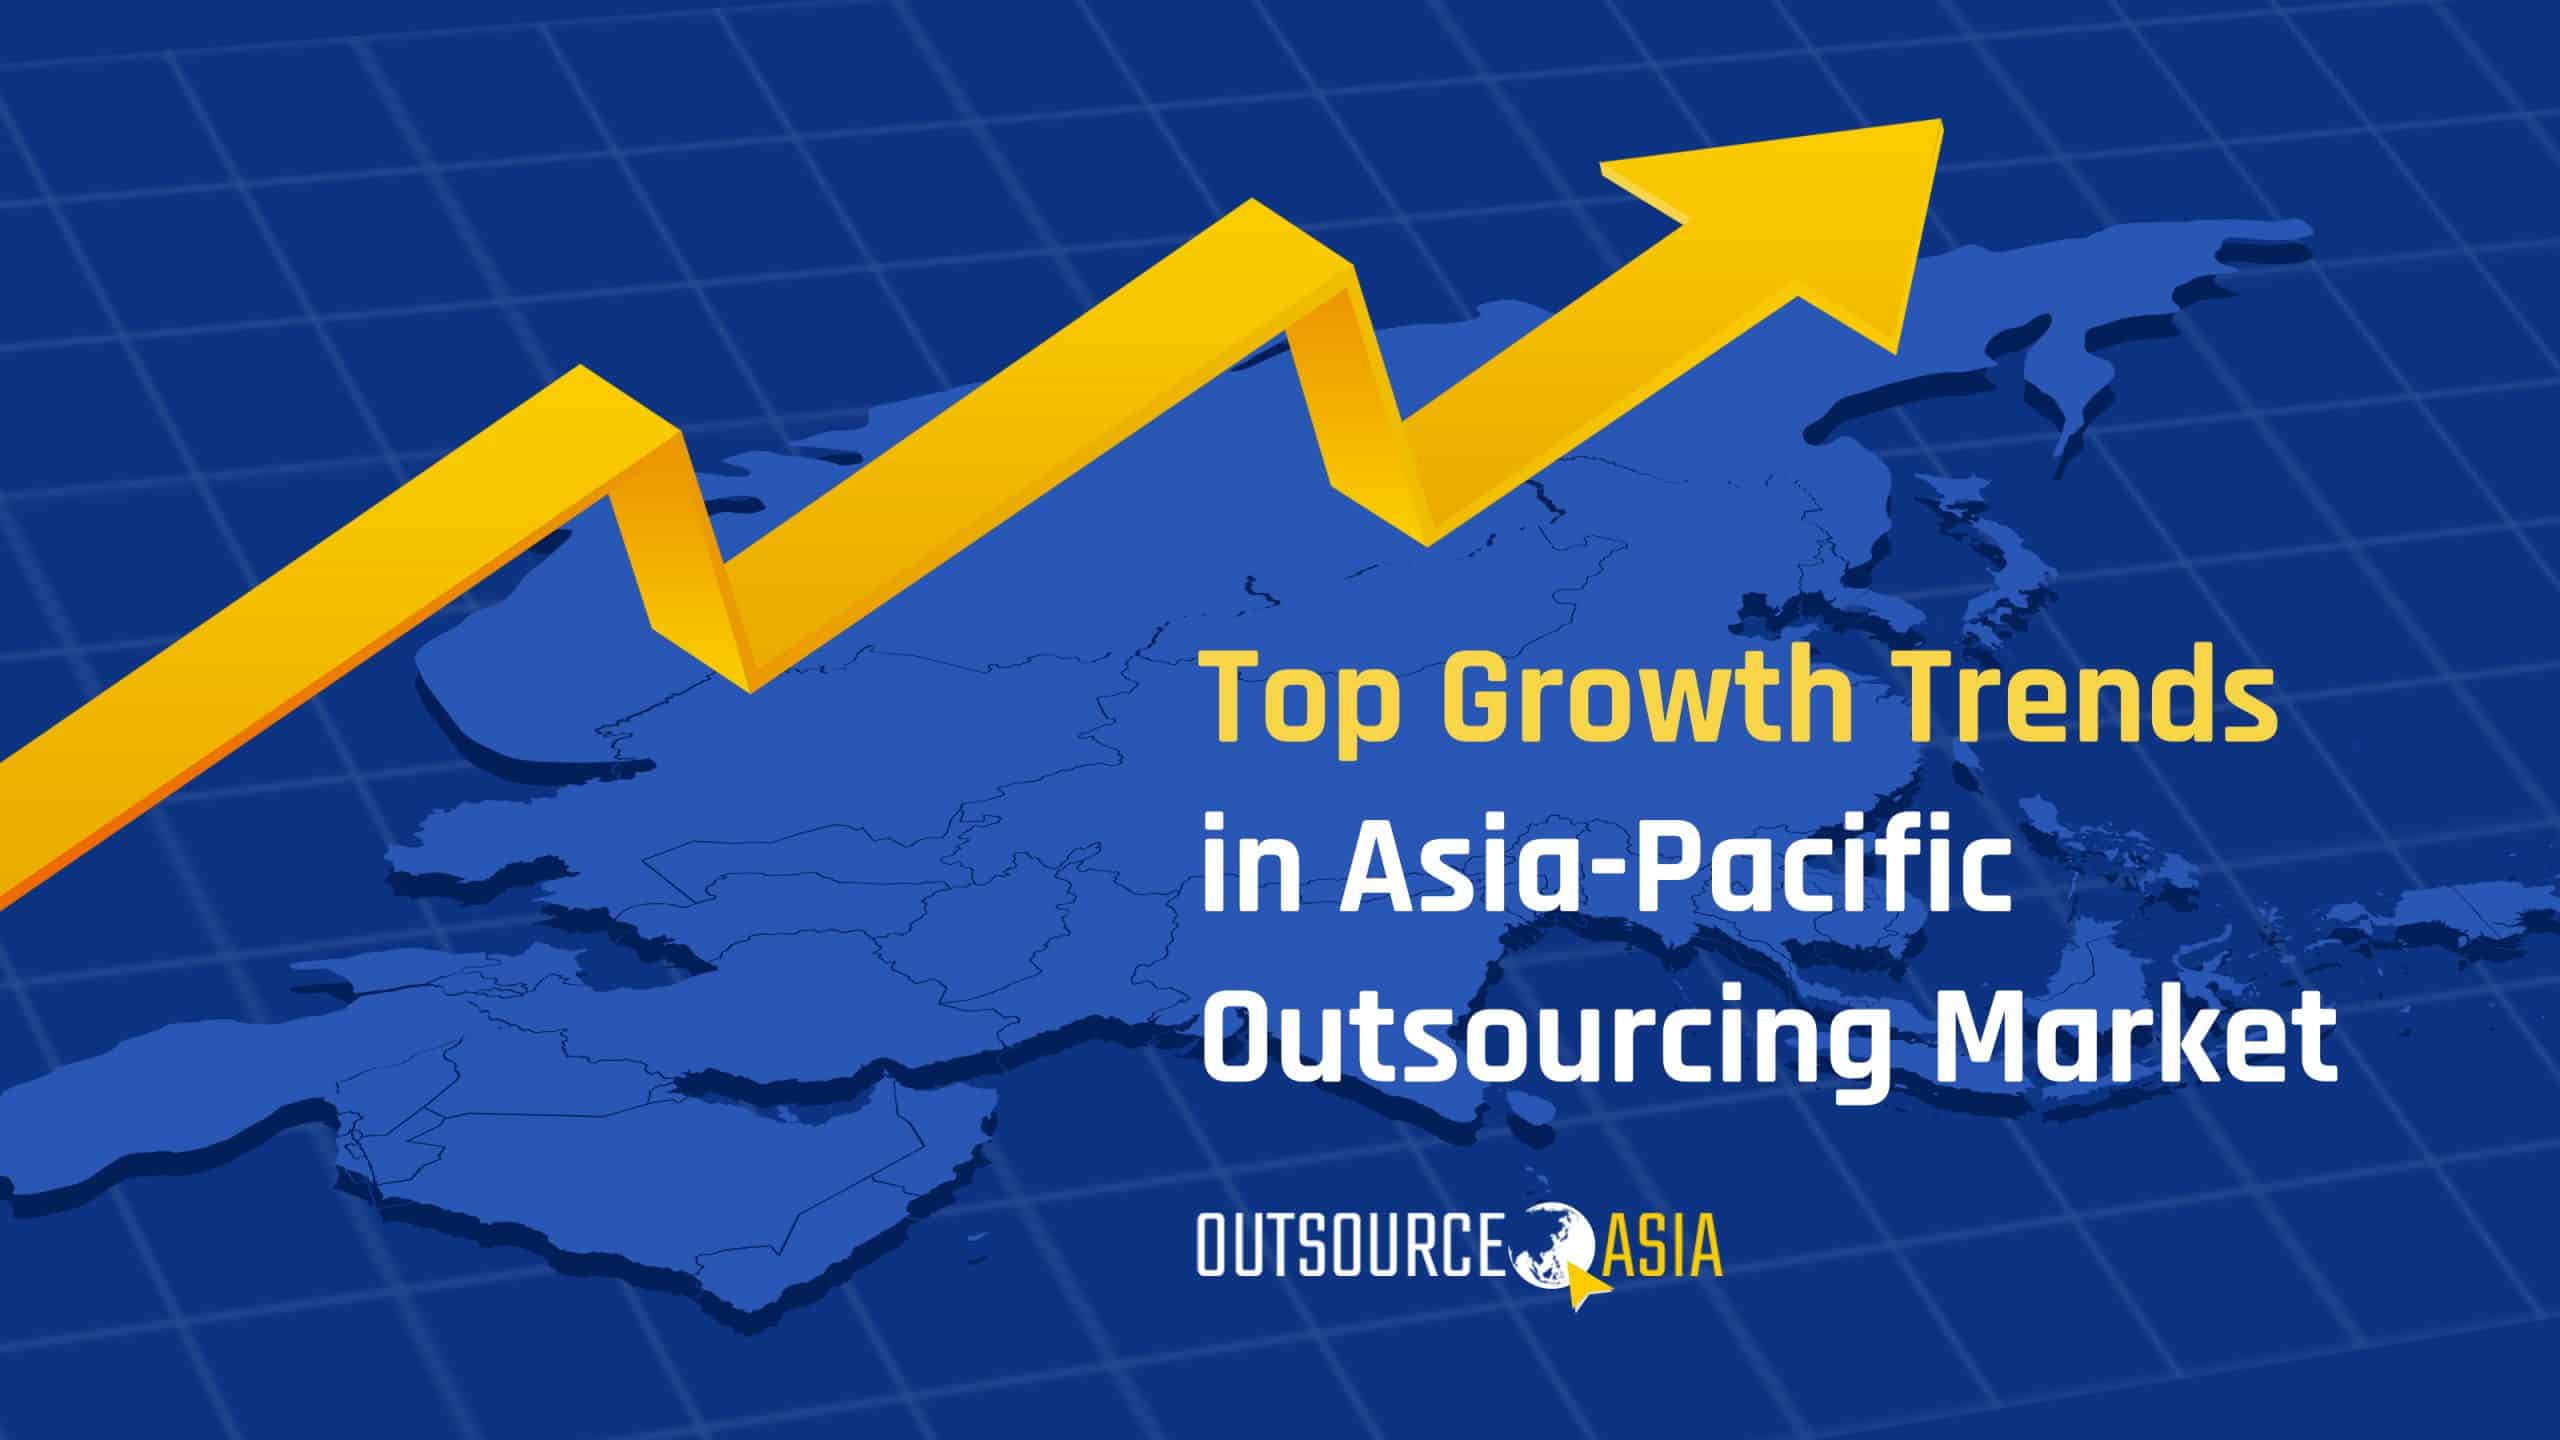 Top Growth Trends in Asia-Pacific Outsourcing Market